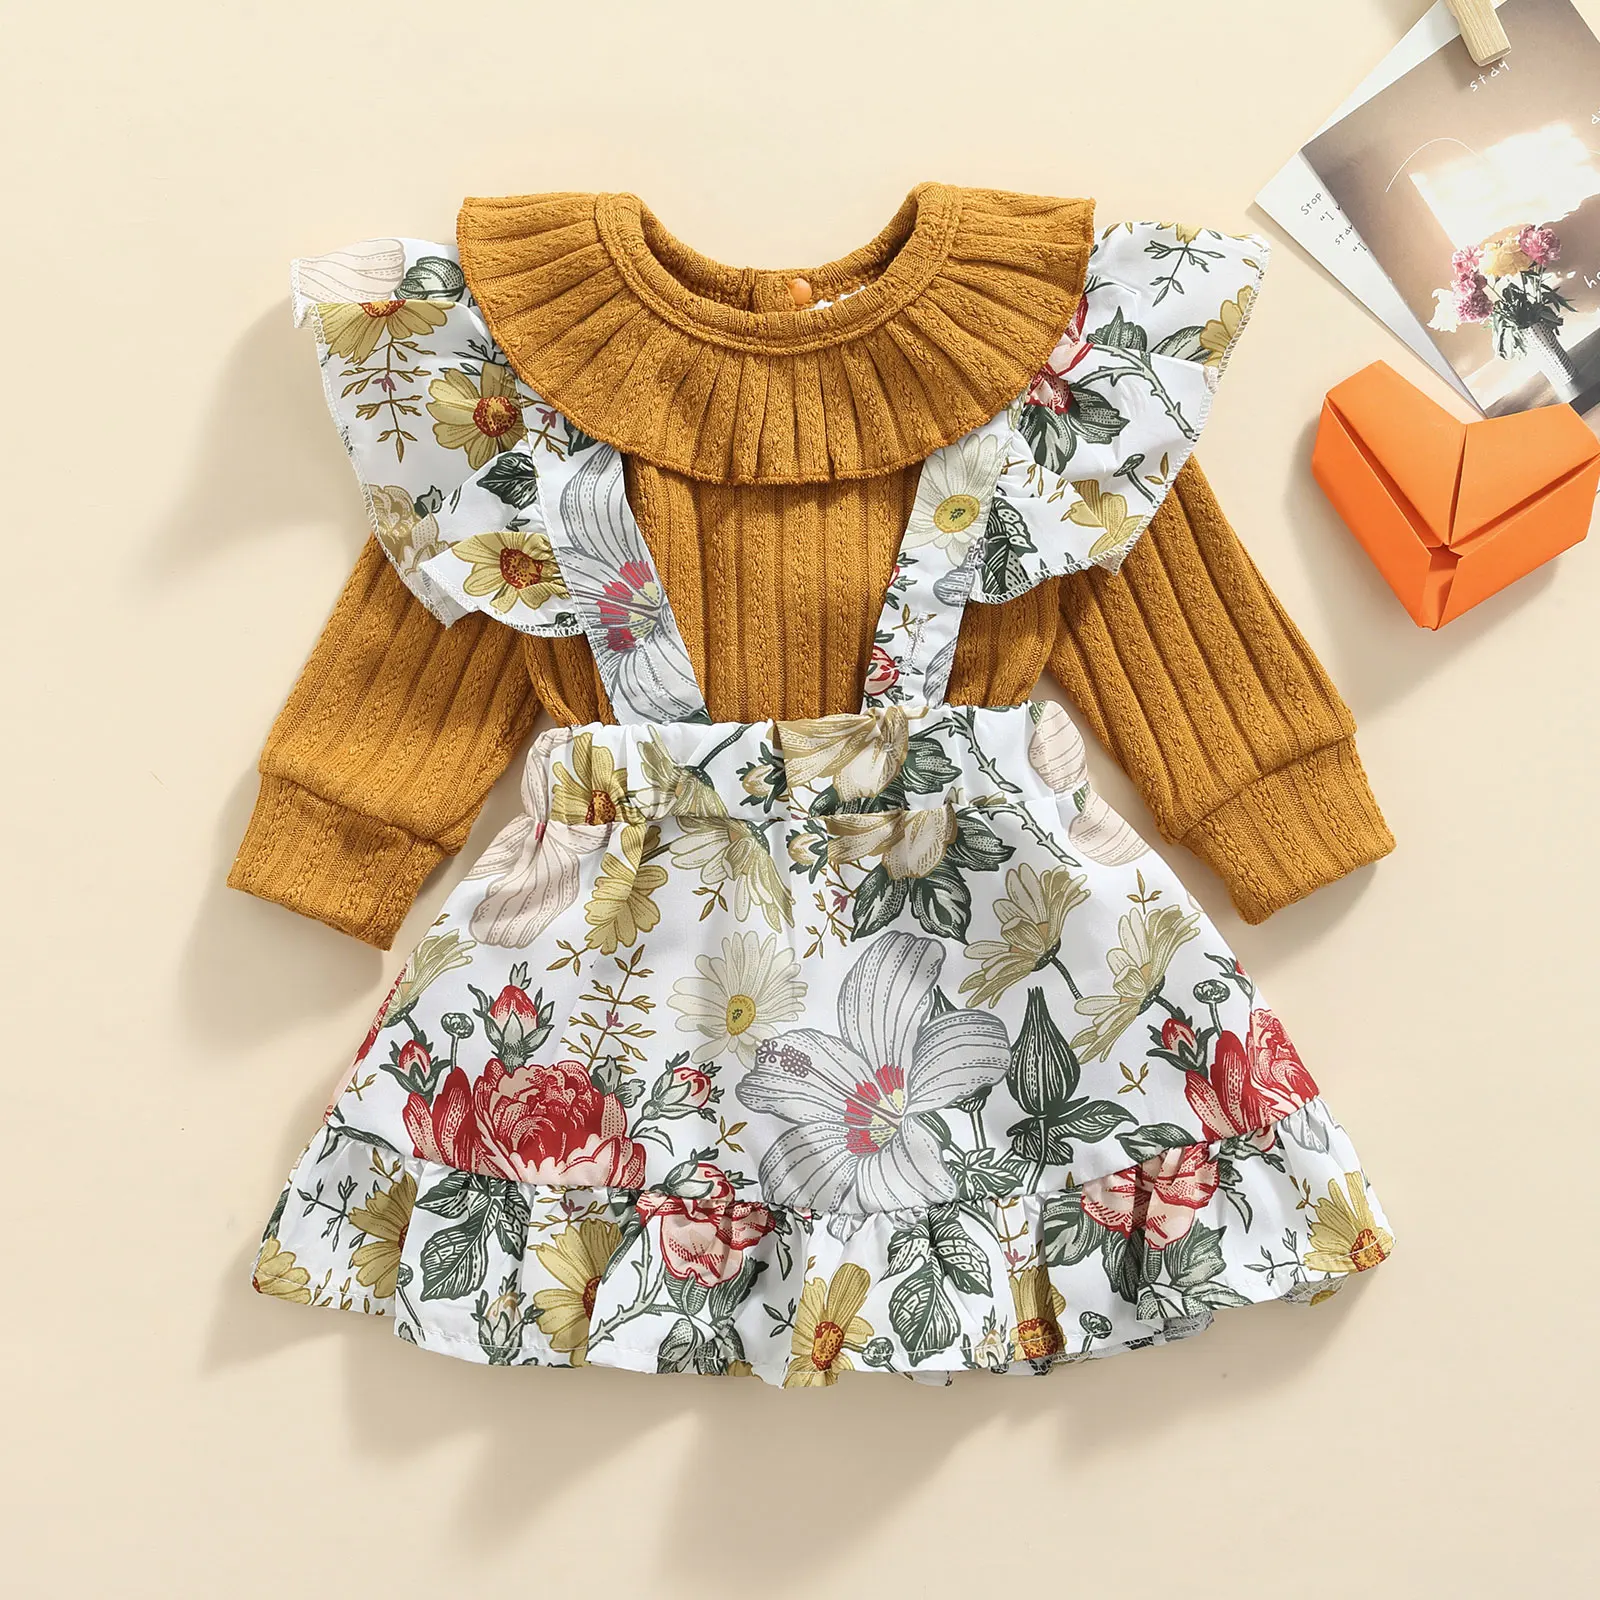 baby clothes penguin set Ma&Baby 0-24M Floral Baby Girl Clothes Set Newborn Infant Girls Ruffles Romper Skirts Flower Print Outfits Autumn Spring DD88 Baby Clothing Set discount